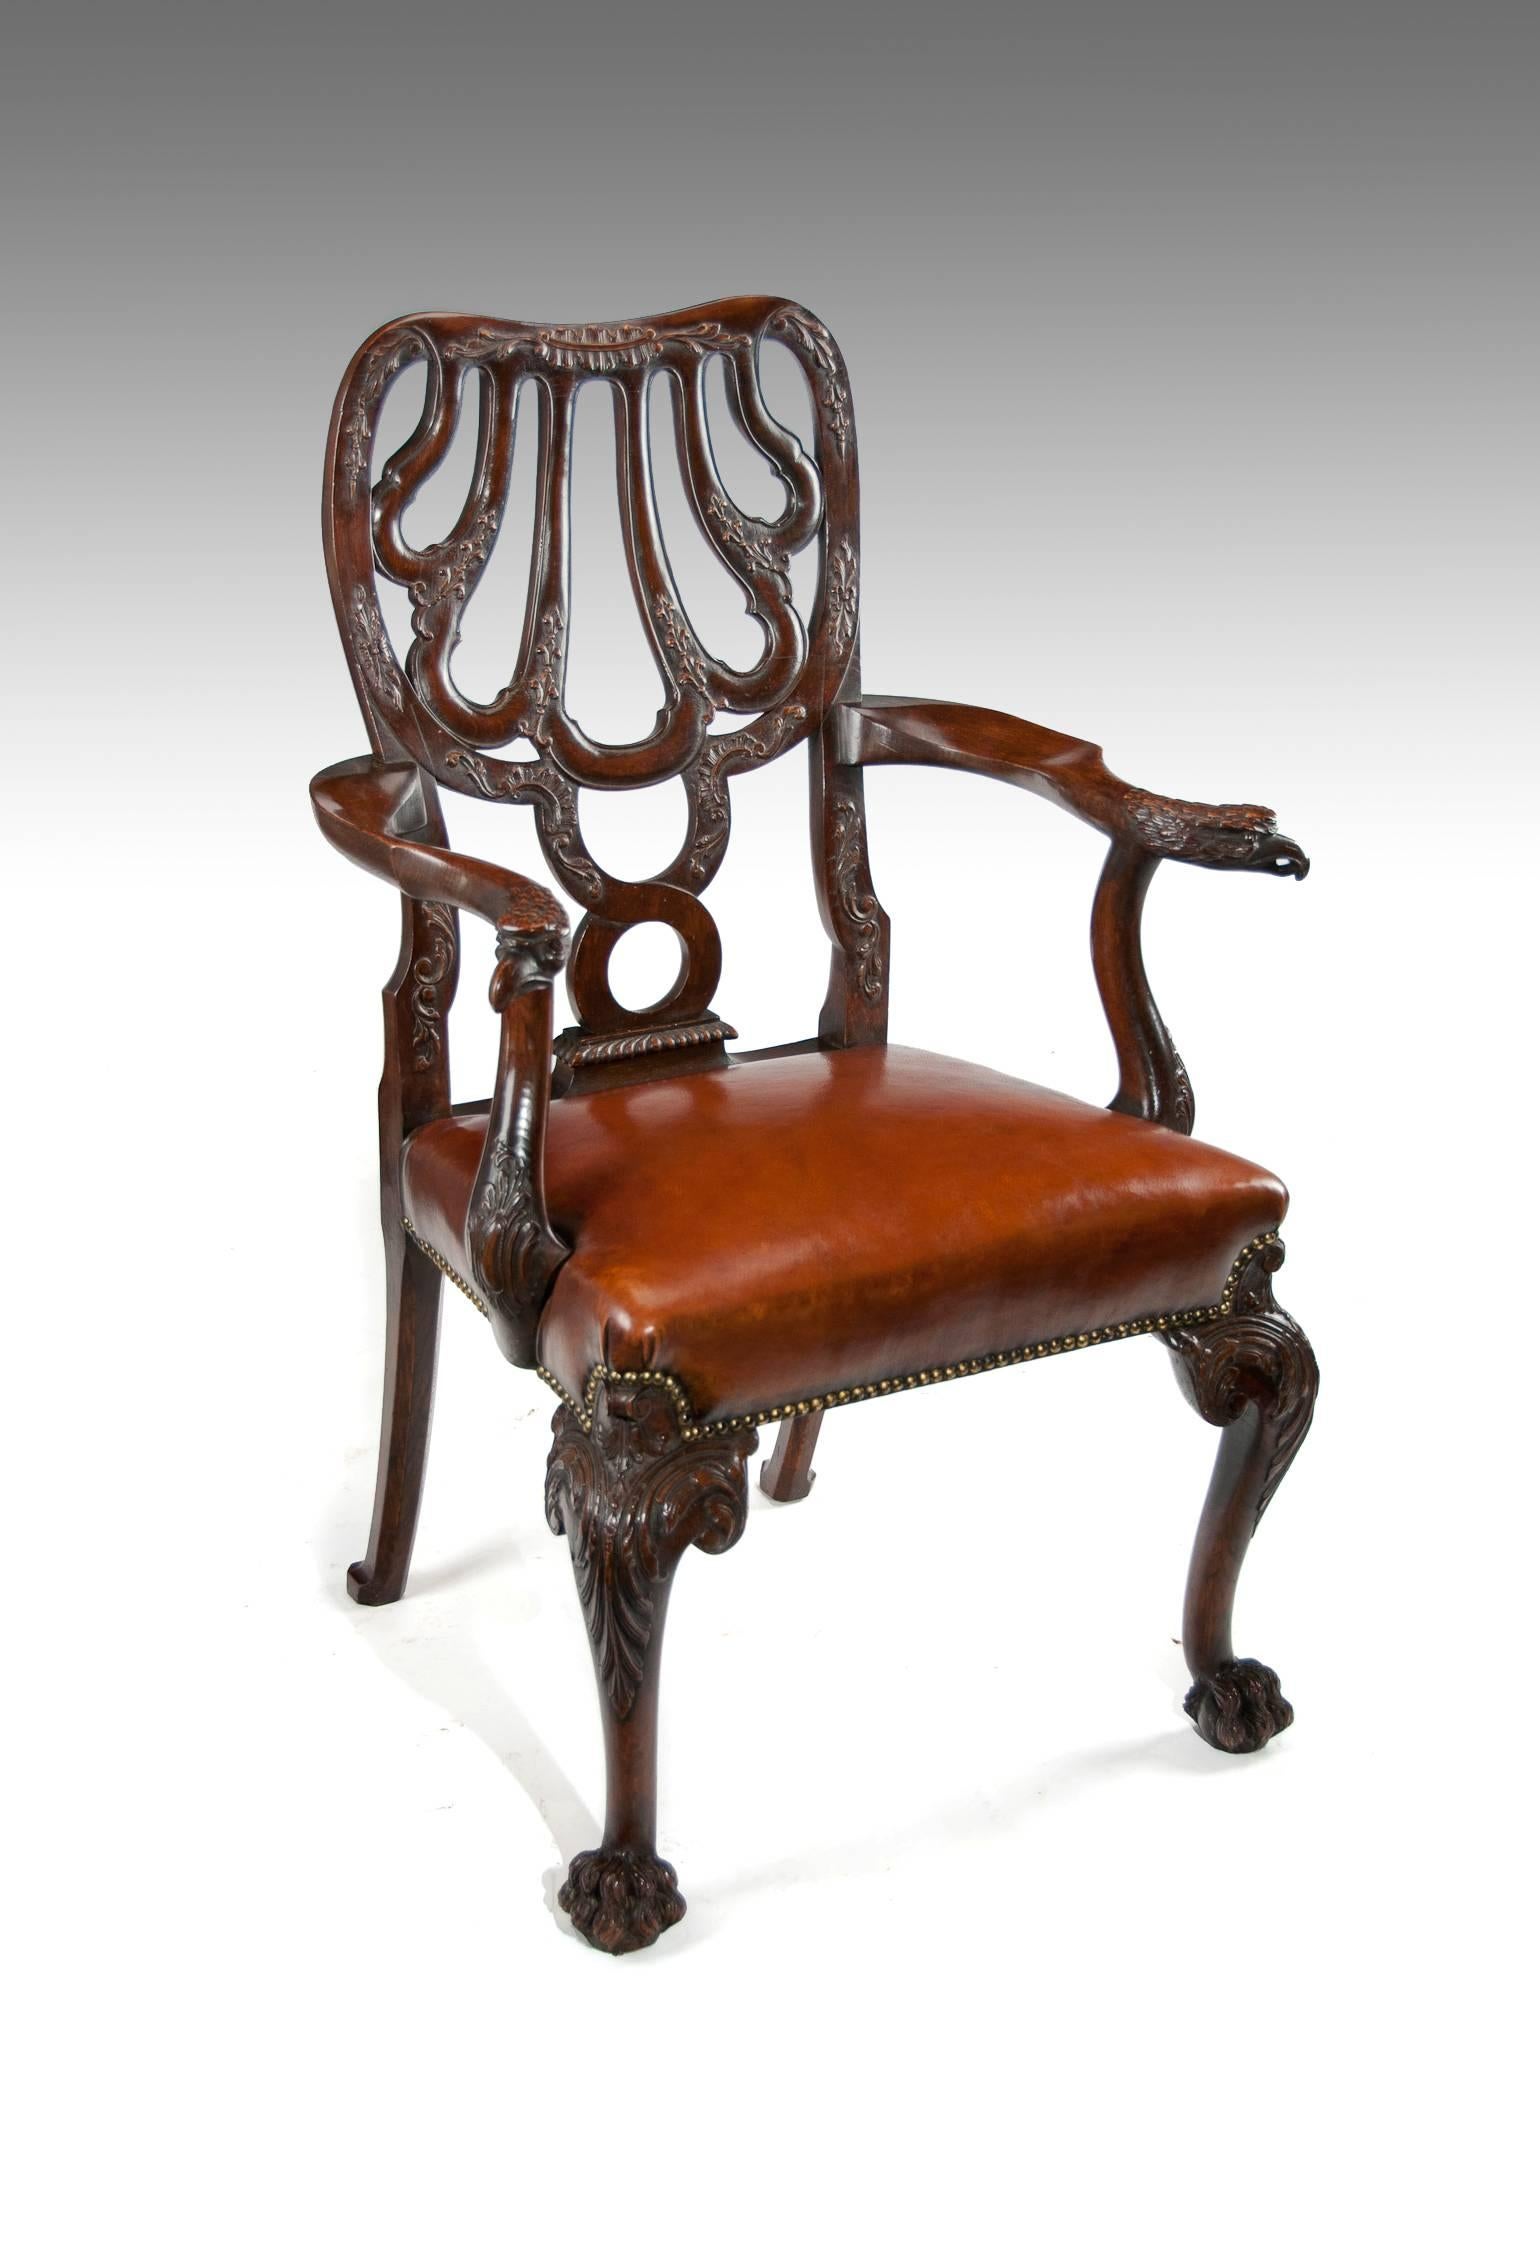 A fine quality 19th century leather upholstered desk, armchair after a design by Giles Grendey (This chair possibly being Irish), circa 1860.
Constructed in the best quality oak almost looking like walnut the hooped back design being of open strap